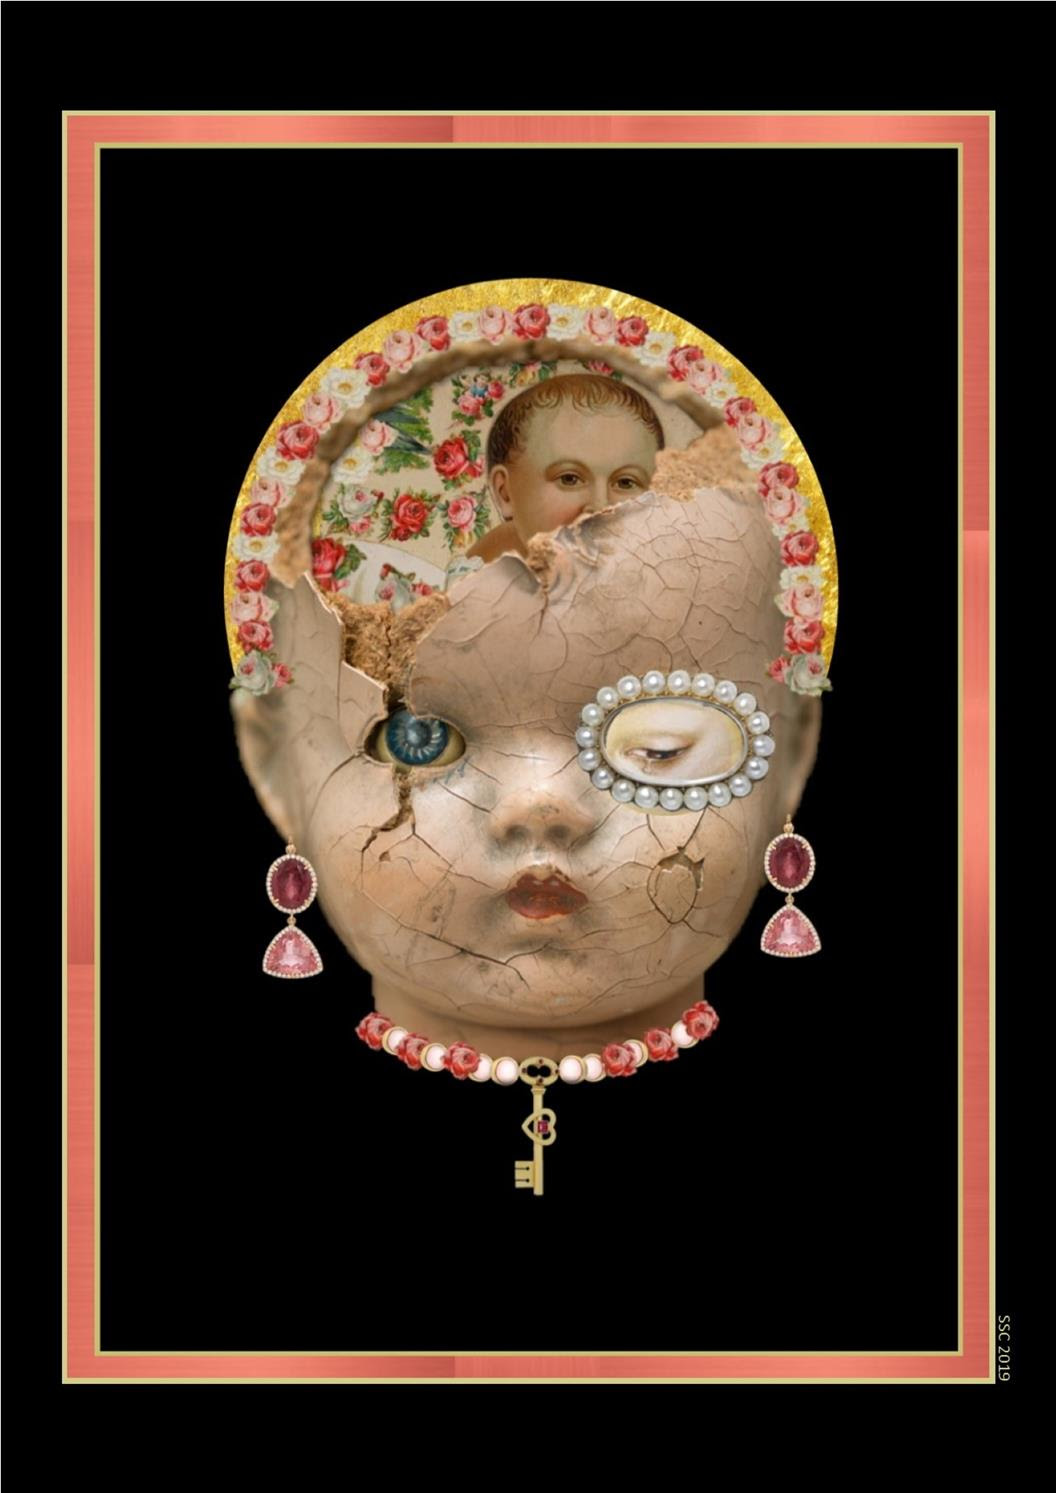 Face of a doll on a black background framed by a rectangular pink frame. The doll’s face is cracked and collaged over with decorative roses and pearls, the doll is wearing hanging gem earrings and a necklace decorated with a heart shaped key.